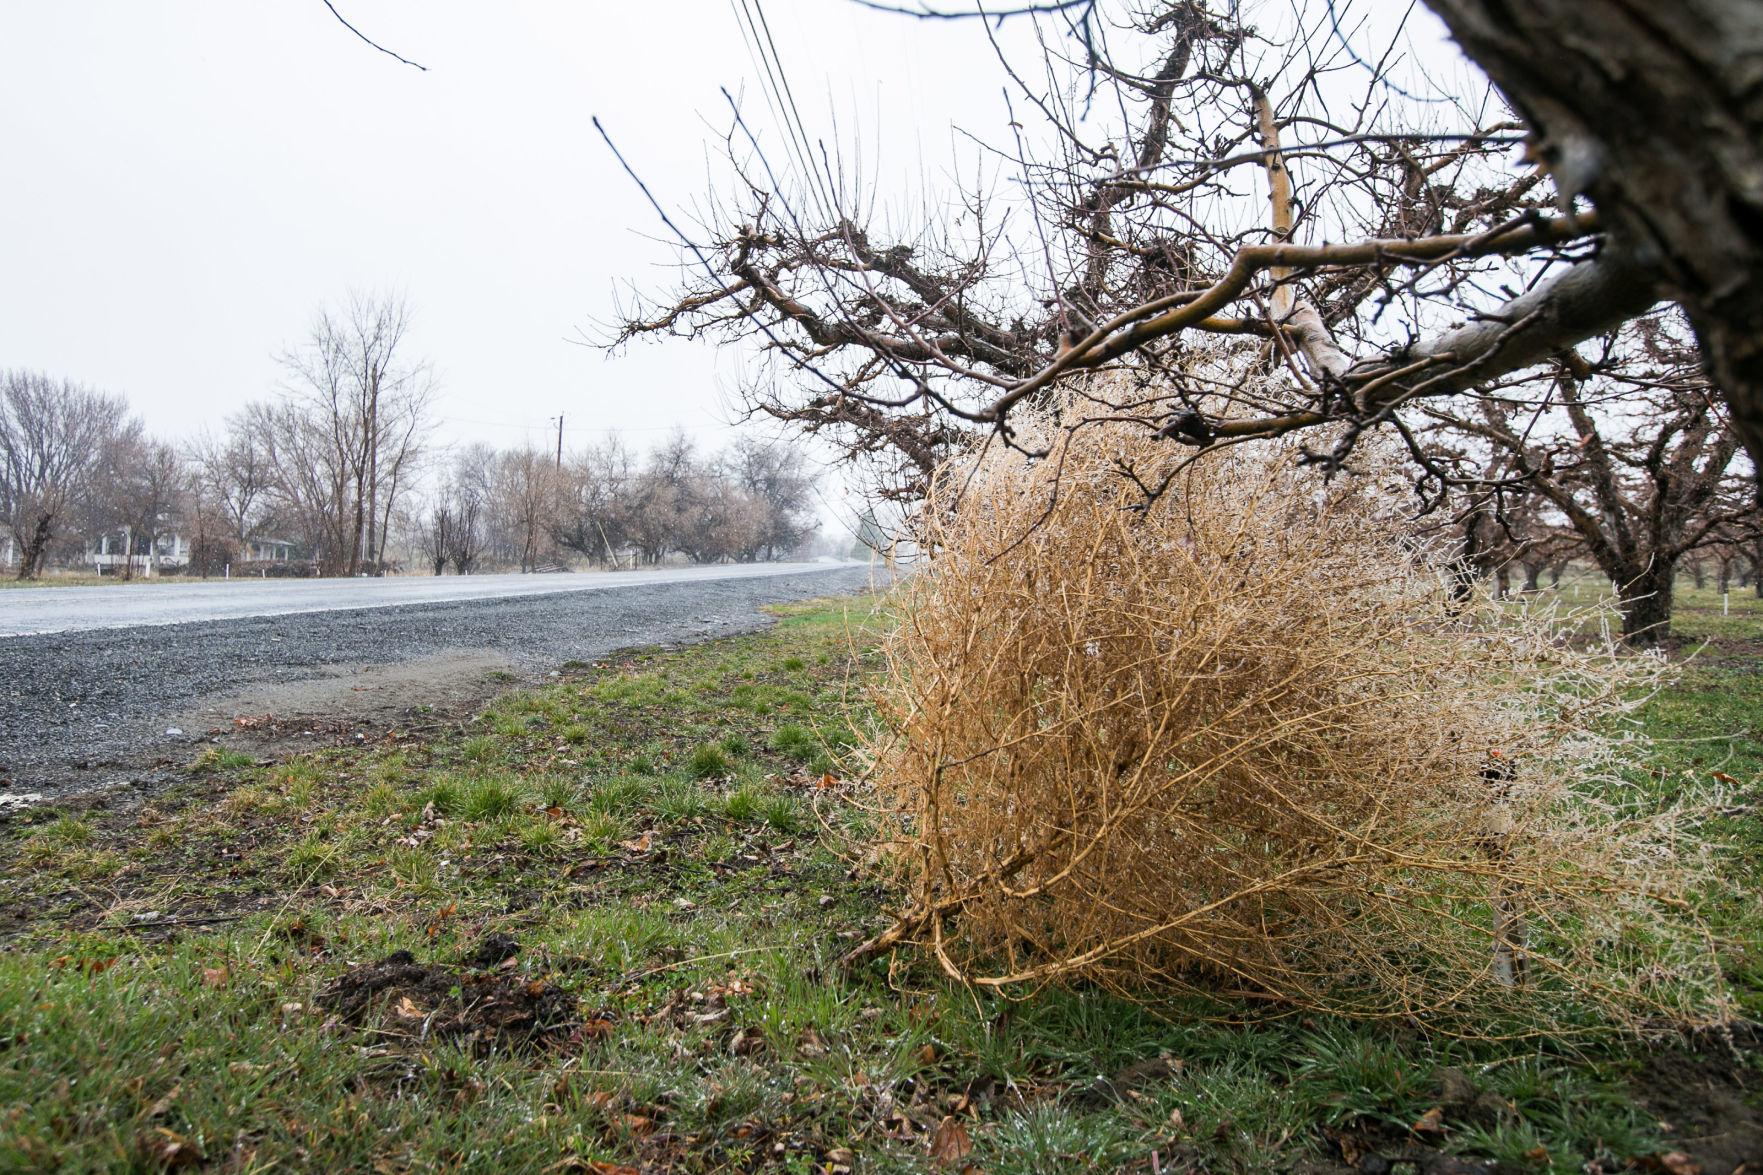 Tumbling tumbleweeds: Western icon also can be an unwelcome guest, Local